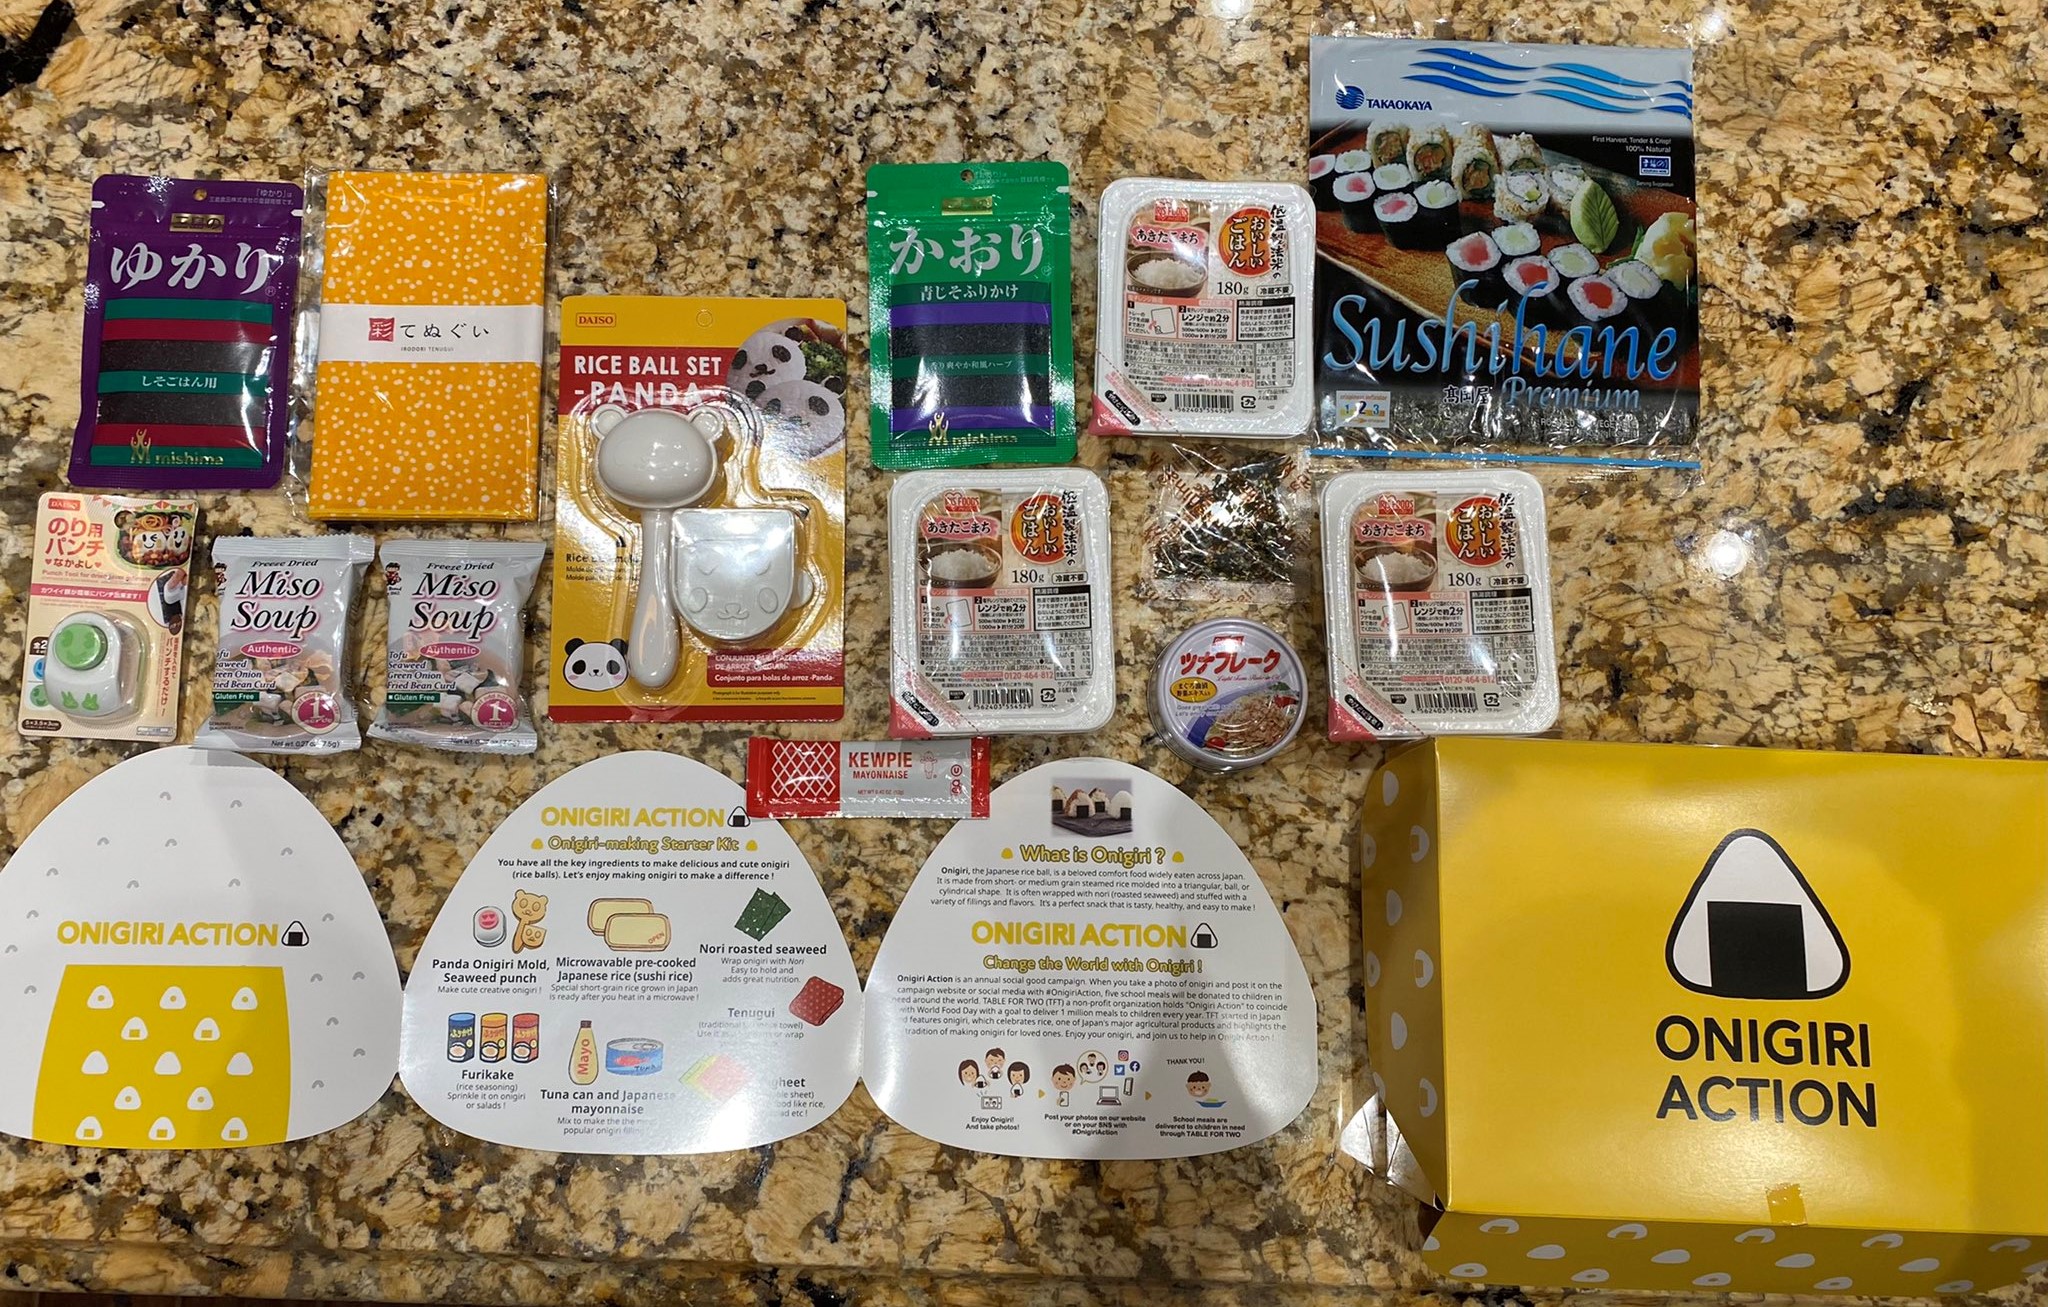 Ingredients and tools for making onigiri, Japanese rice balls, are laid out on a counter. The ingredients include instant rice, canned tuna and sheets of dried seaweed. There is also a rice press that shapes the rice into the shape of a panda.